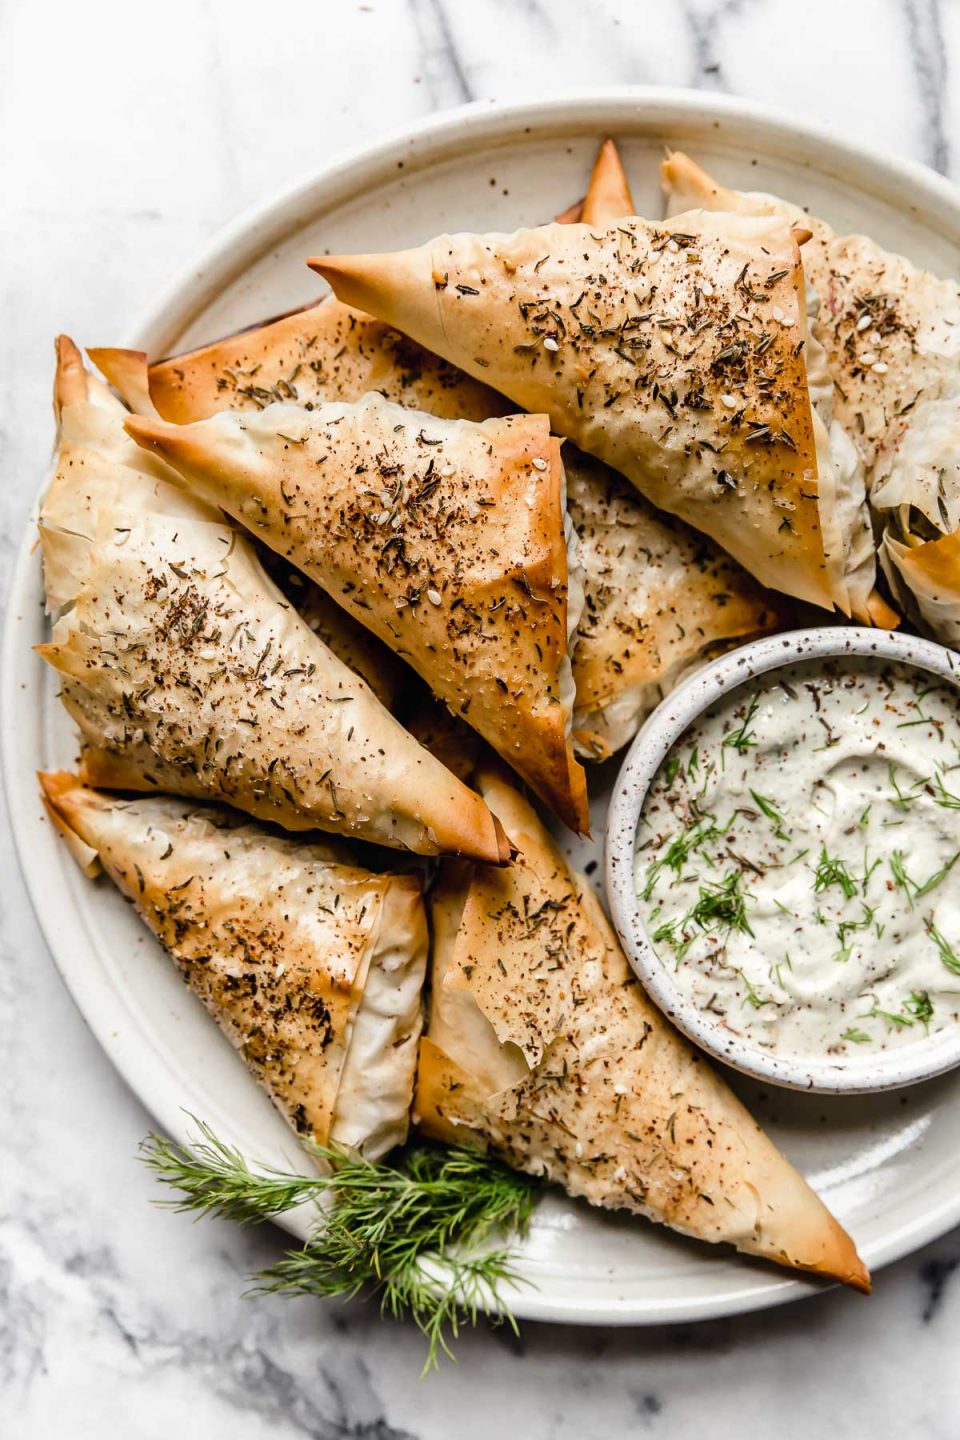 Baked Spanakopita Triangles on a plate with tzatziki dipping sauce.